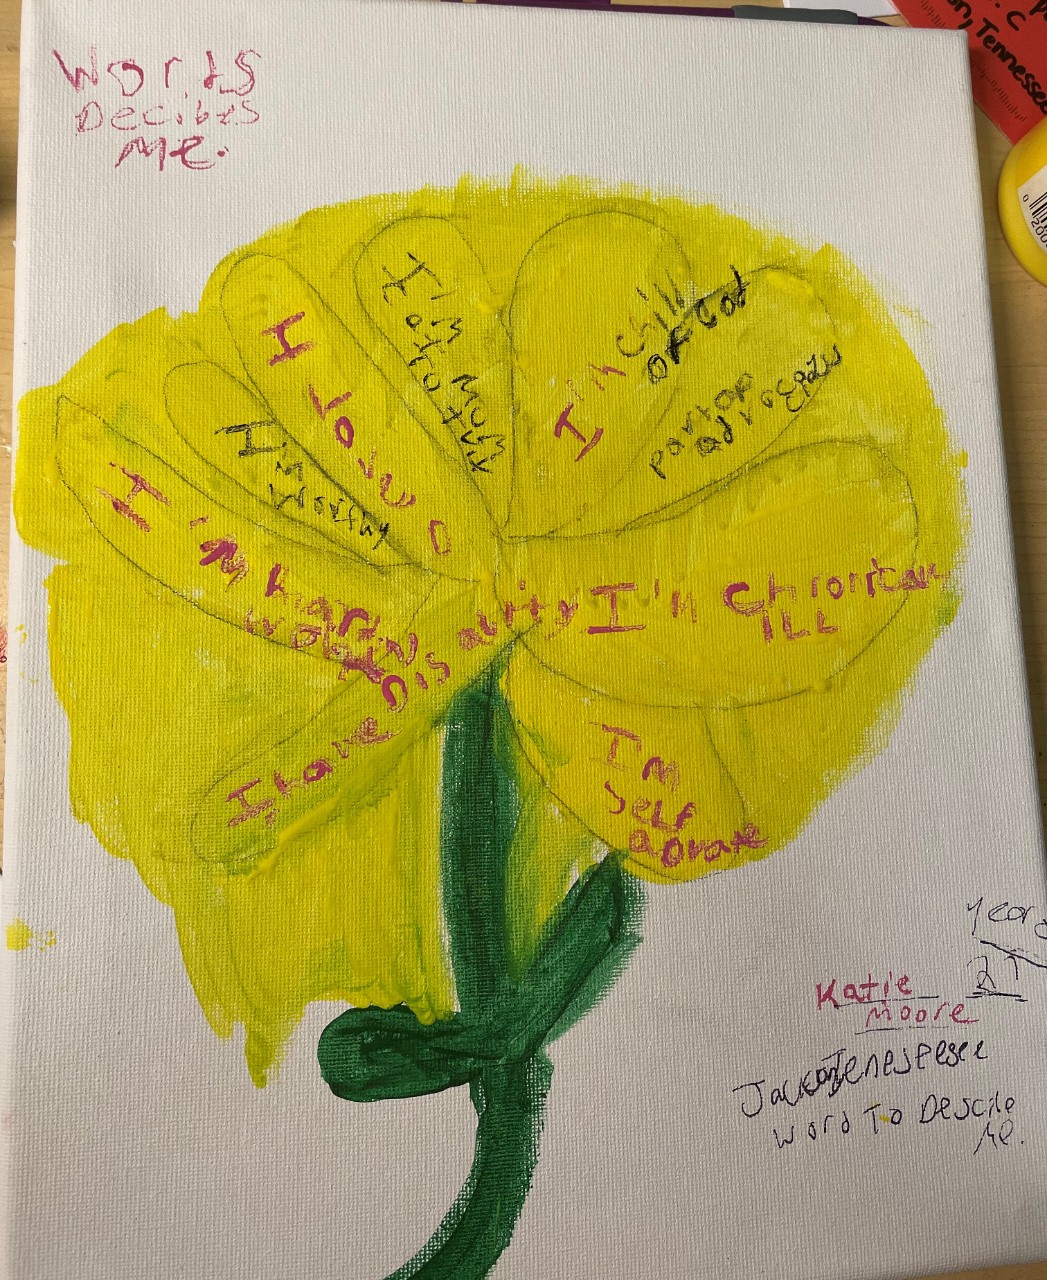 a painting of a yellow flower with a green stem, and sentences about the artist are written in pink and black on the petals of the flower. visible phrases include: "I have a disability; I am chronically ill; I am a child of God; I'm cat mom; I'm worthy."